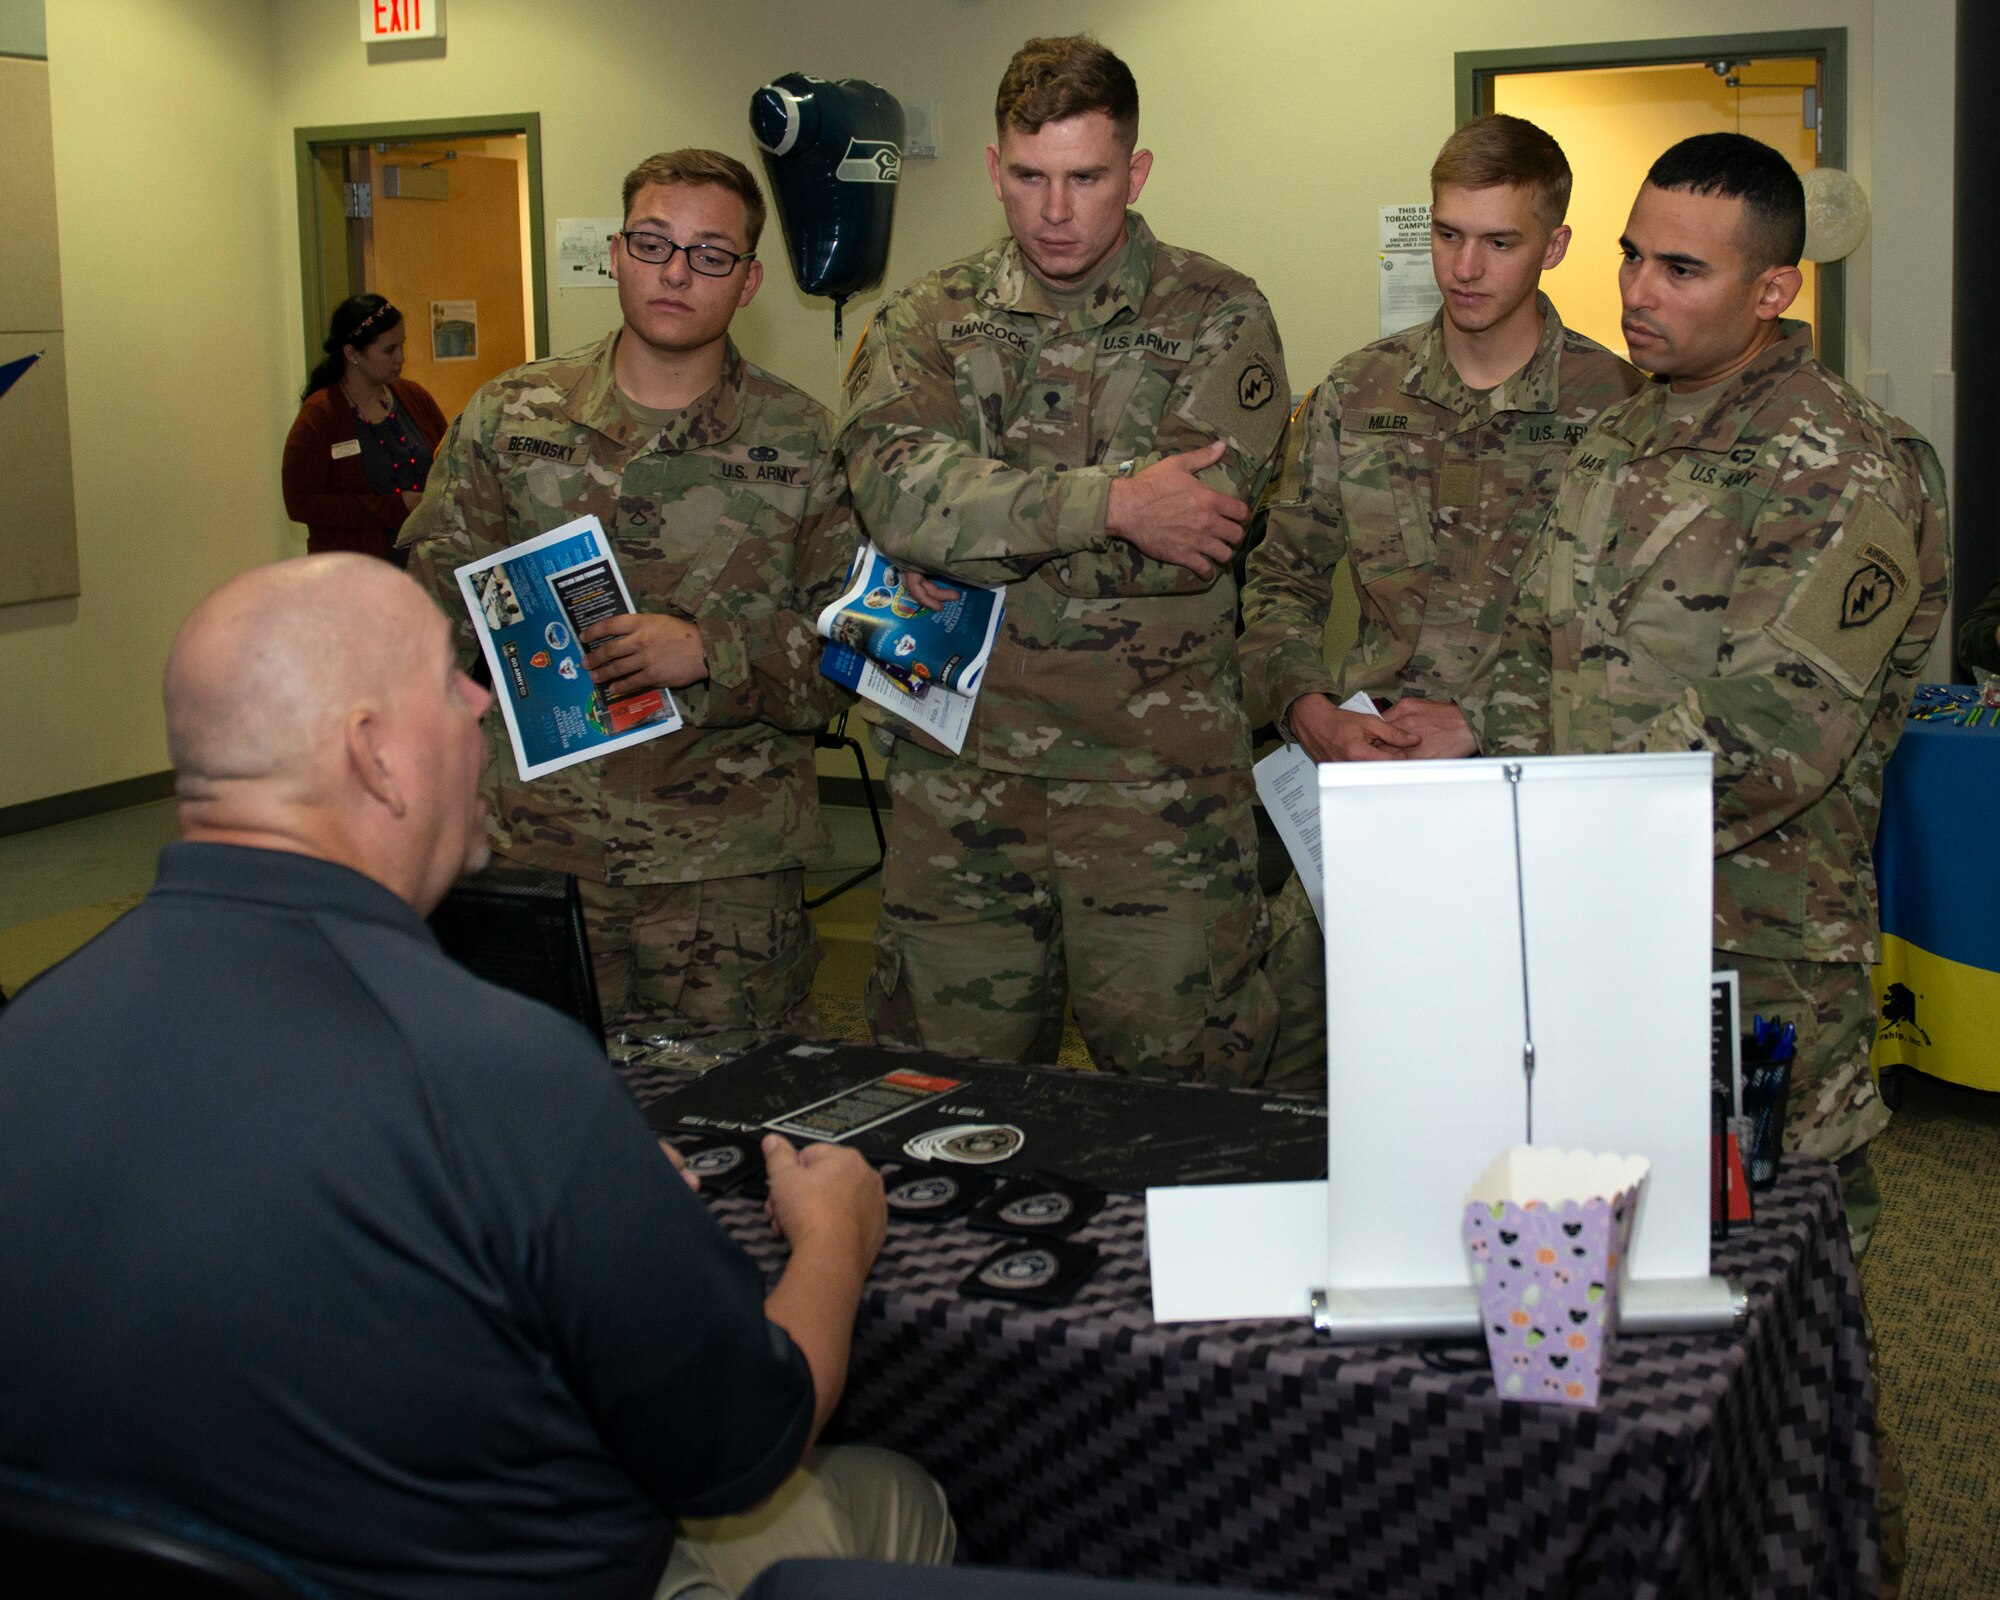 U.S. Soldiers assigned to U.S. Army Alaska attend the Fall Education Fair at Joint Base Elmendorf-Richardson, Alaska, Oct. 31, 2019. The JBER Army Education Center held the event, which allowed more than 20 vendors to showcase different educational opportunities.